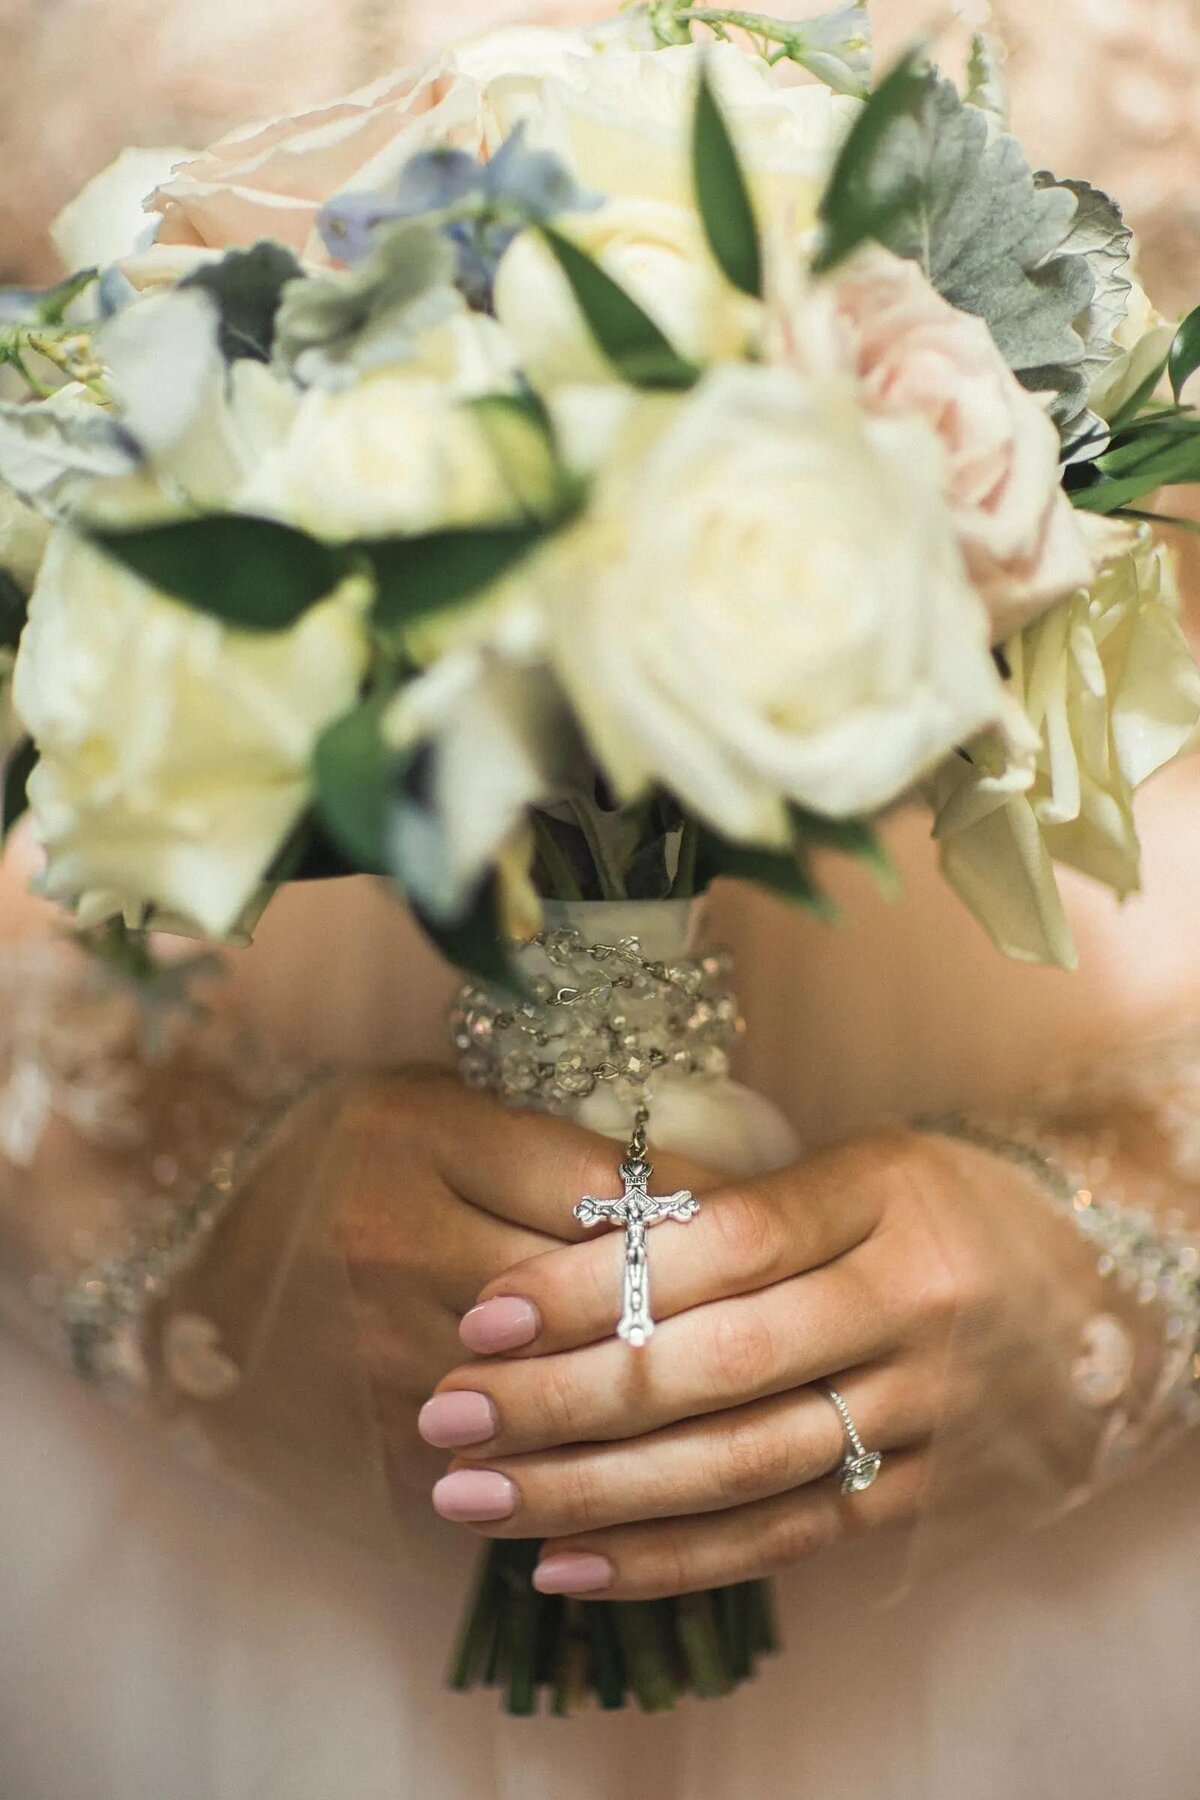 A close-up of a bride's hands clasped over a bouquet, showcasing her wedding ring and a delicate cross